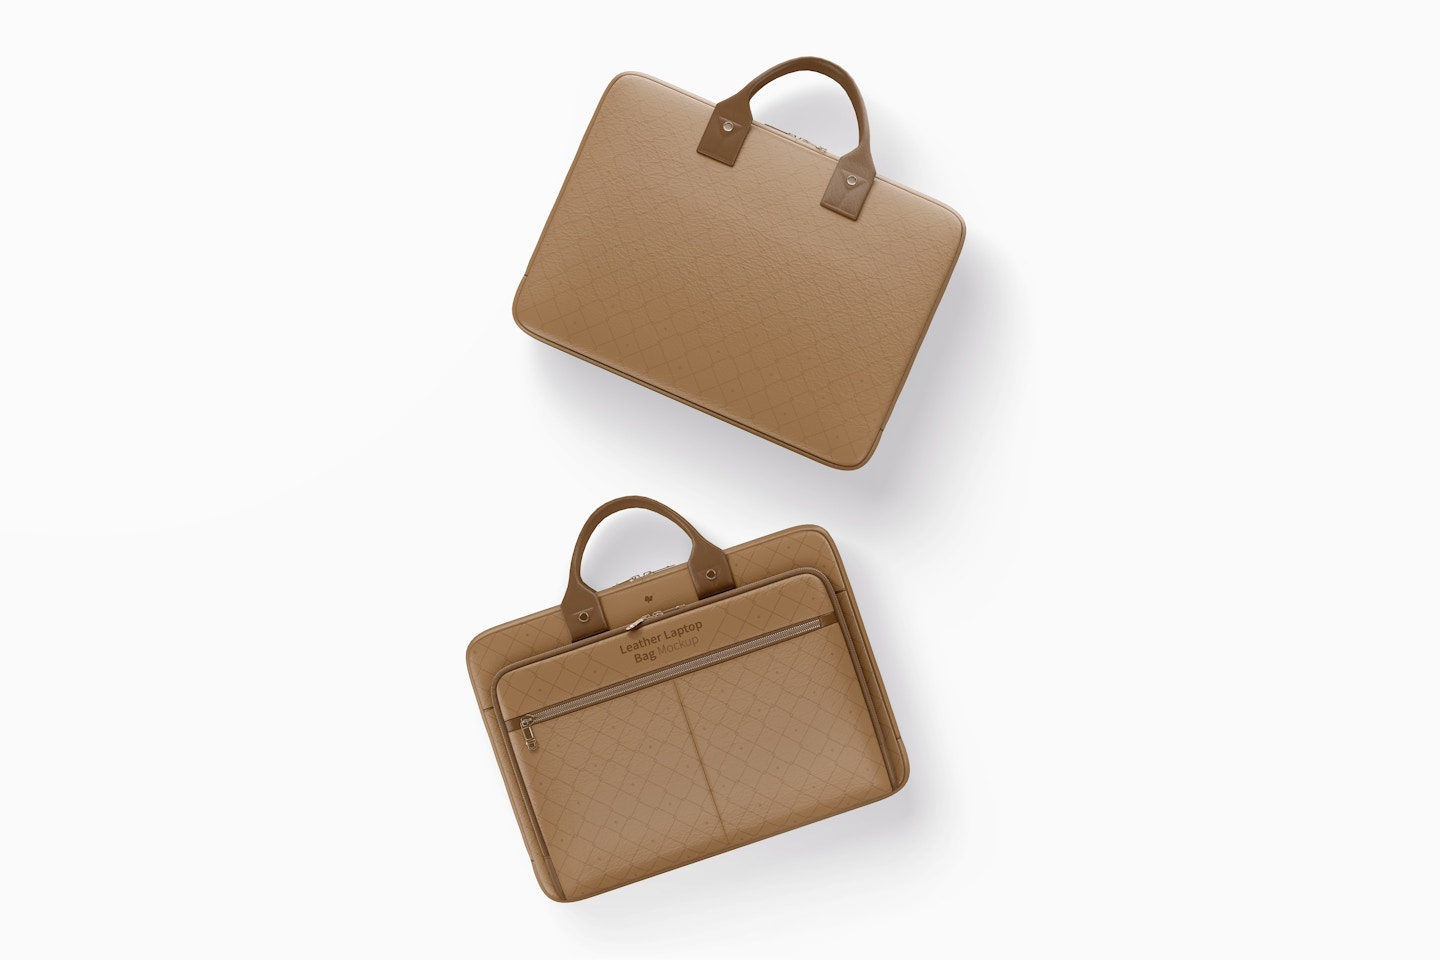 Leather Laptop Bag Mockup, Top View